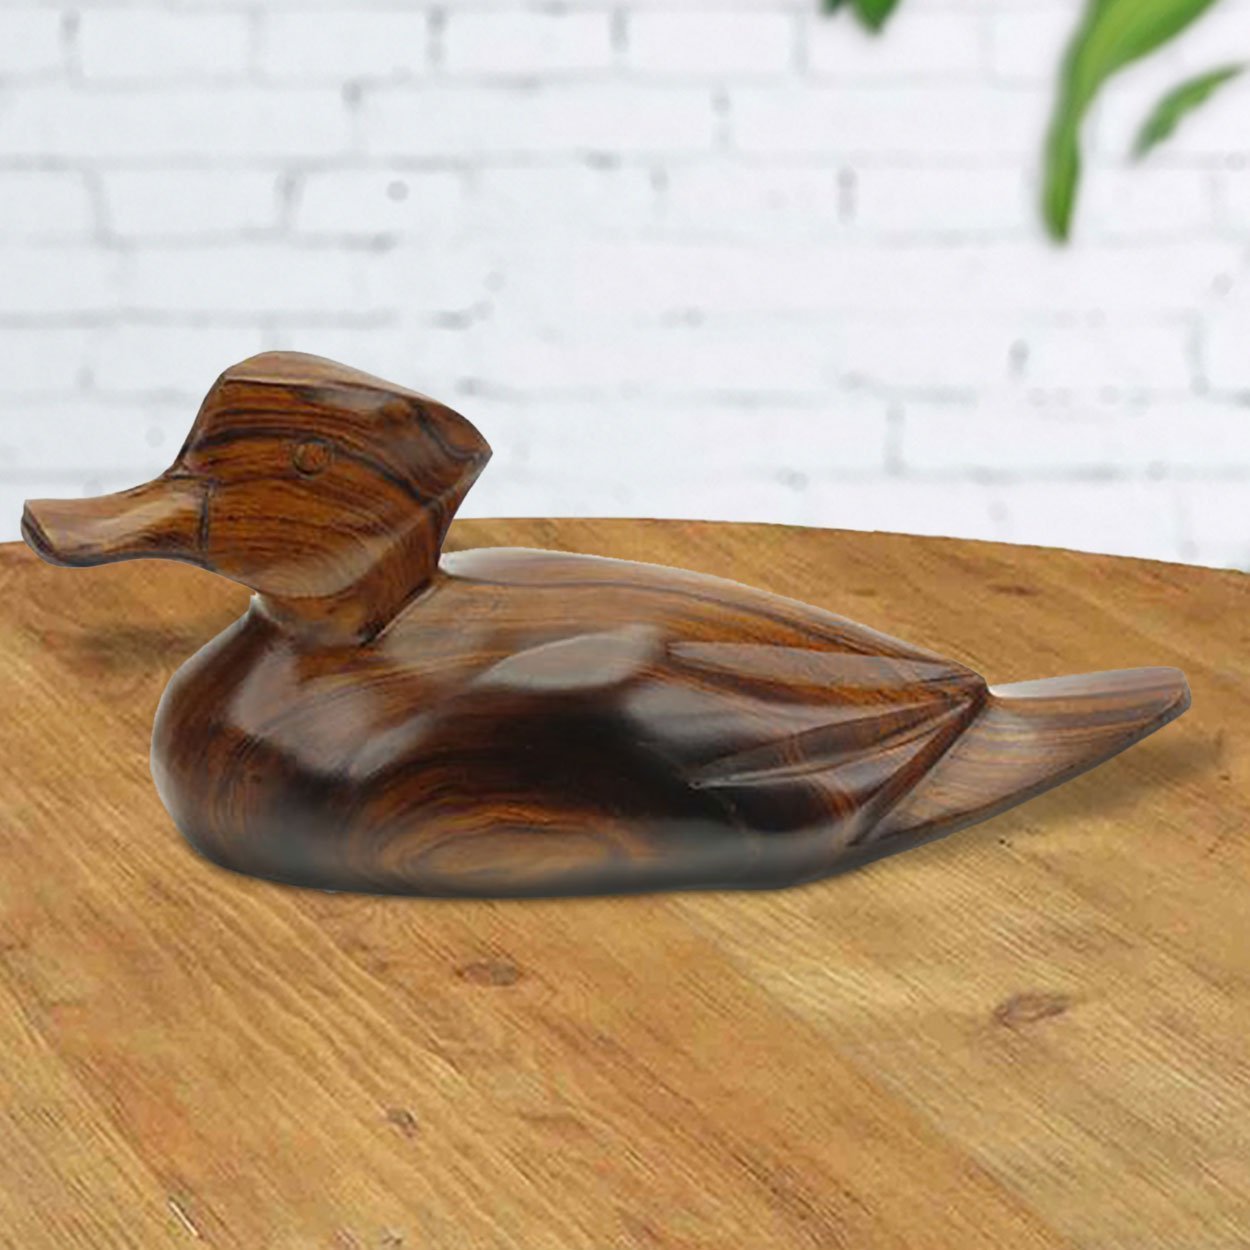 172218 - 5in Long Duck Ironwood Carving